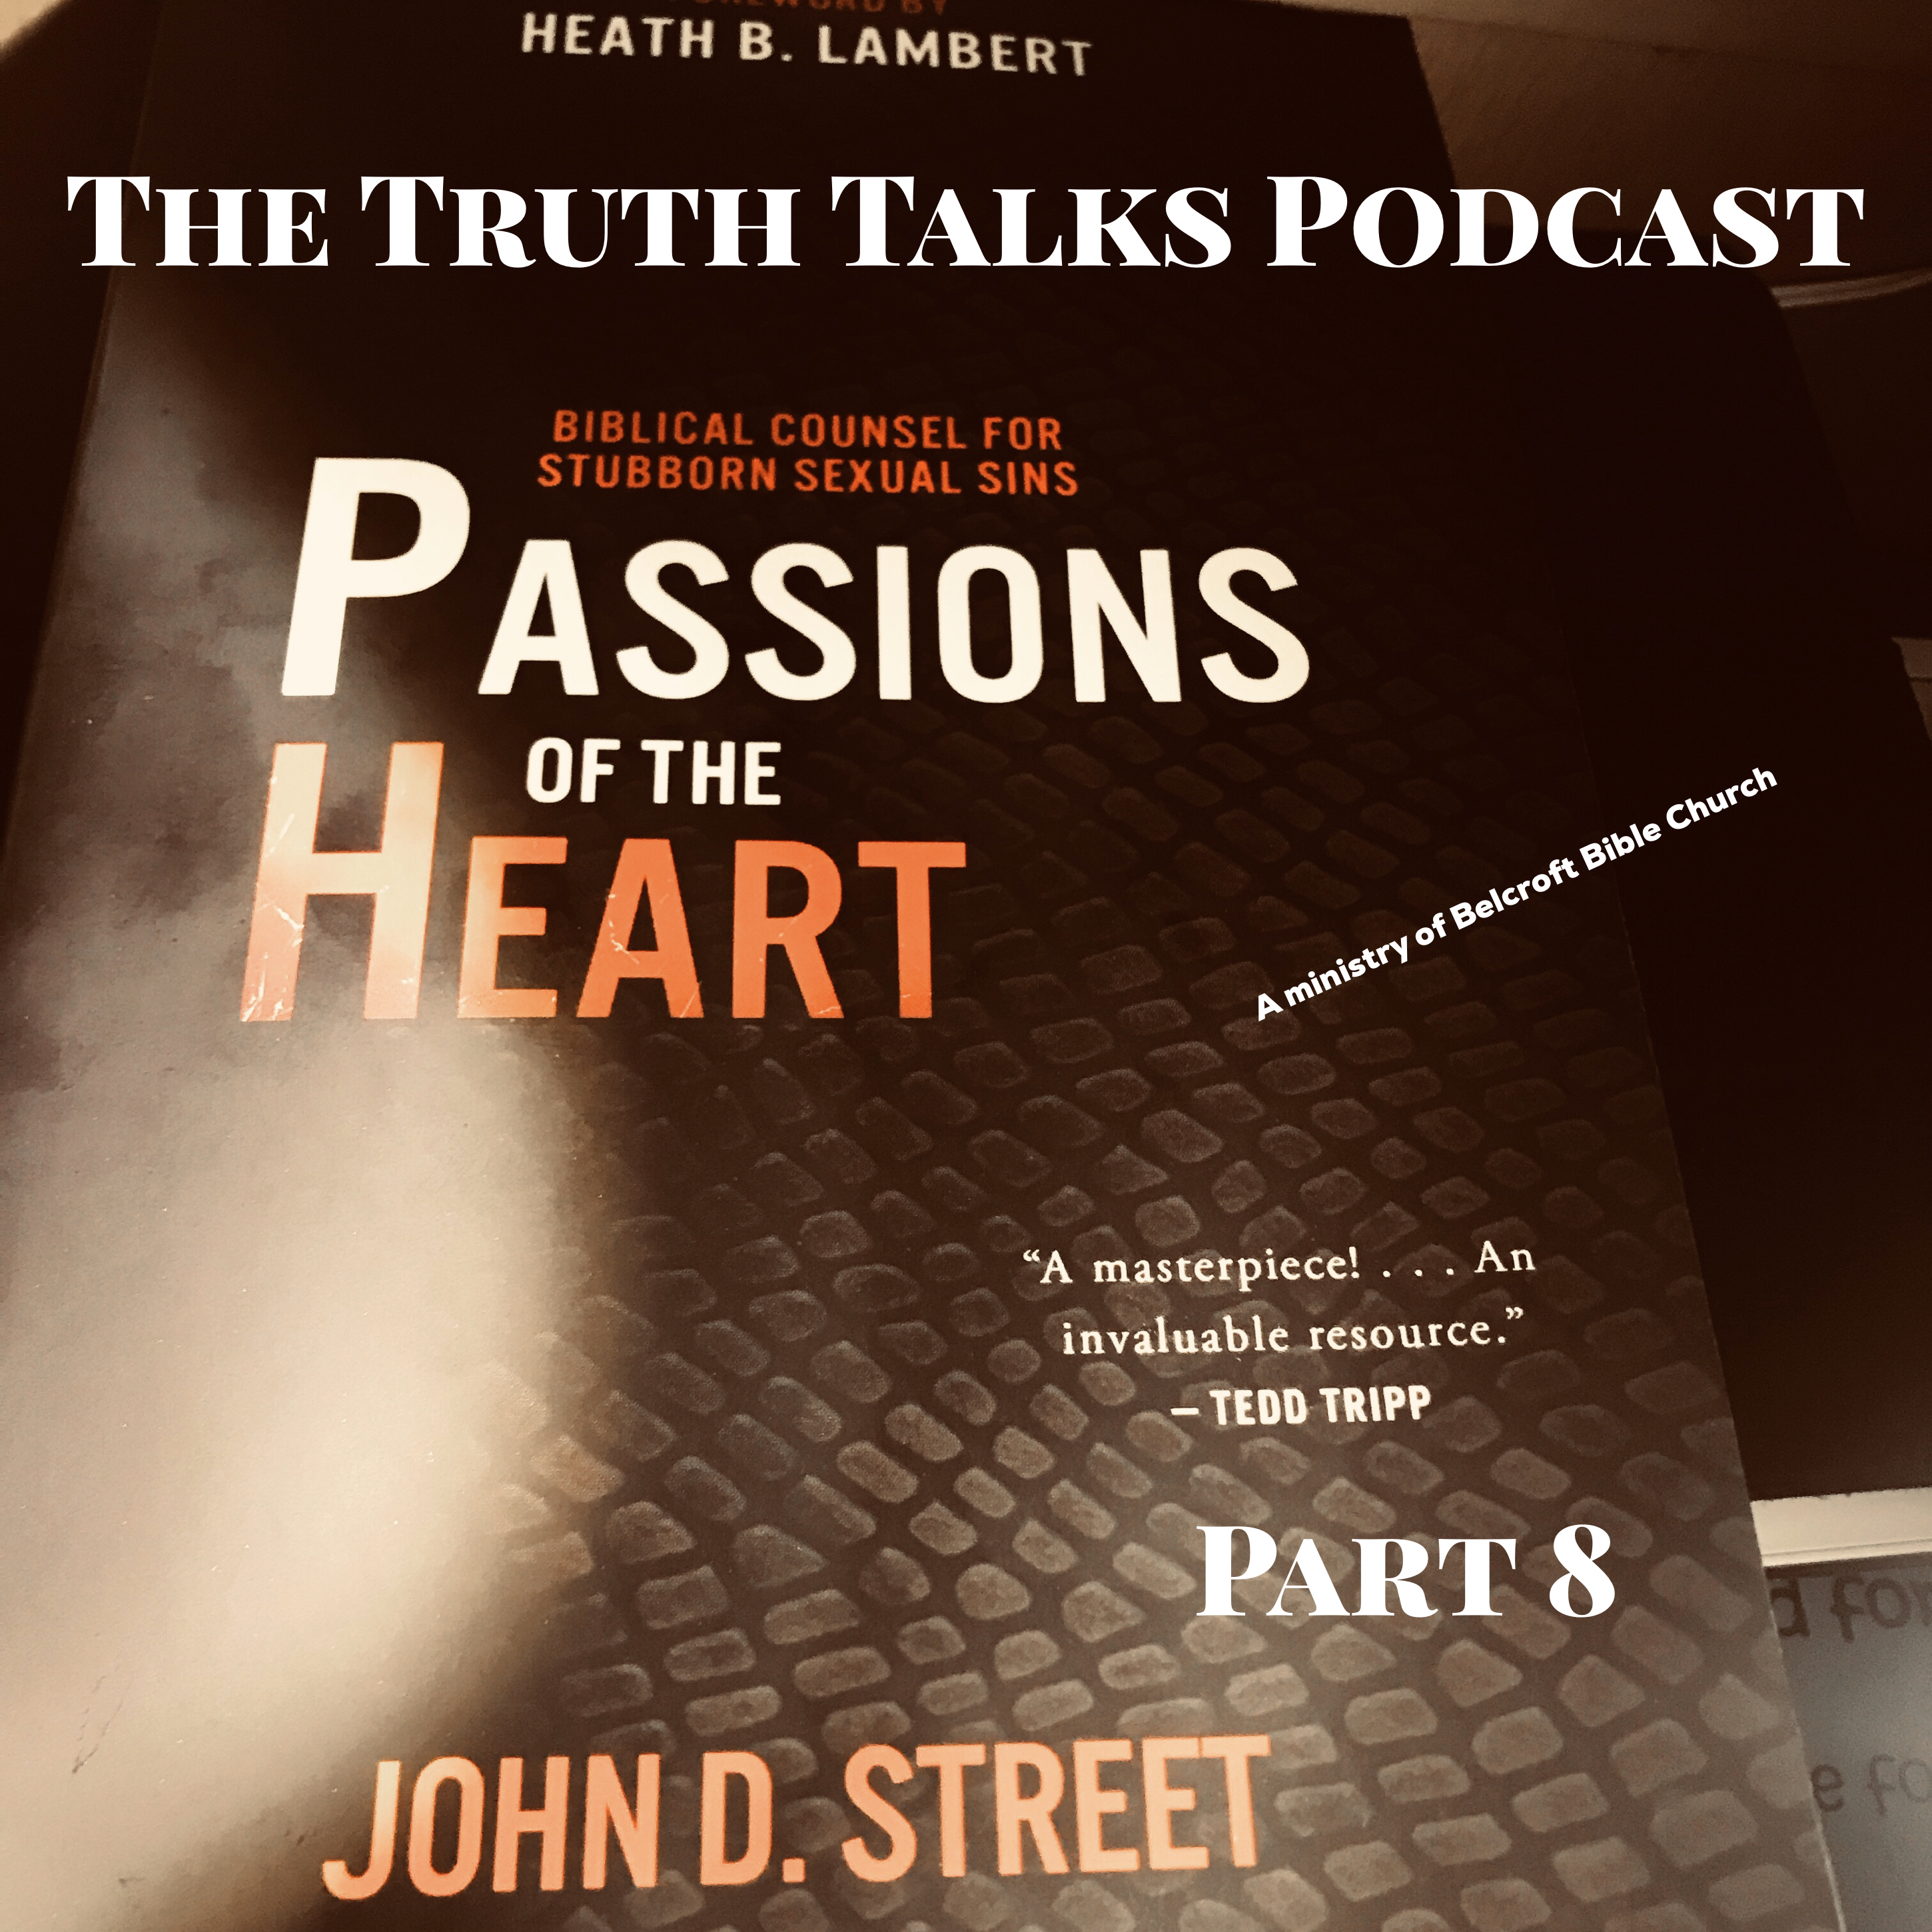 The Truth Talks Podcast 038 - Passions of the Heart Study Part 8